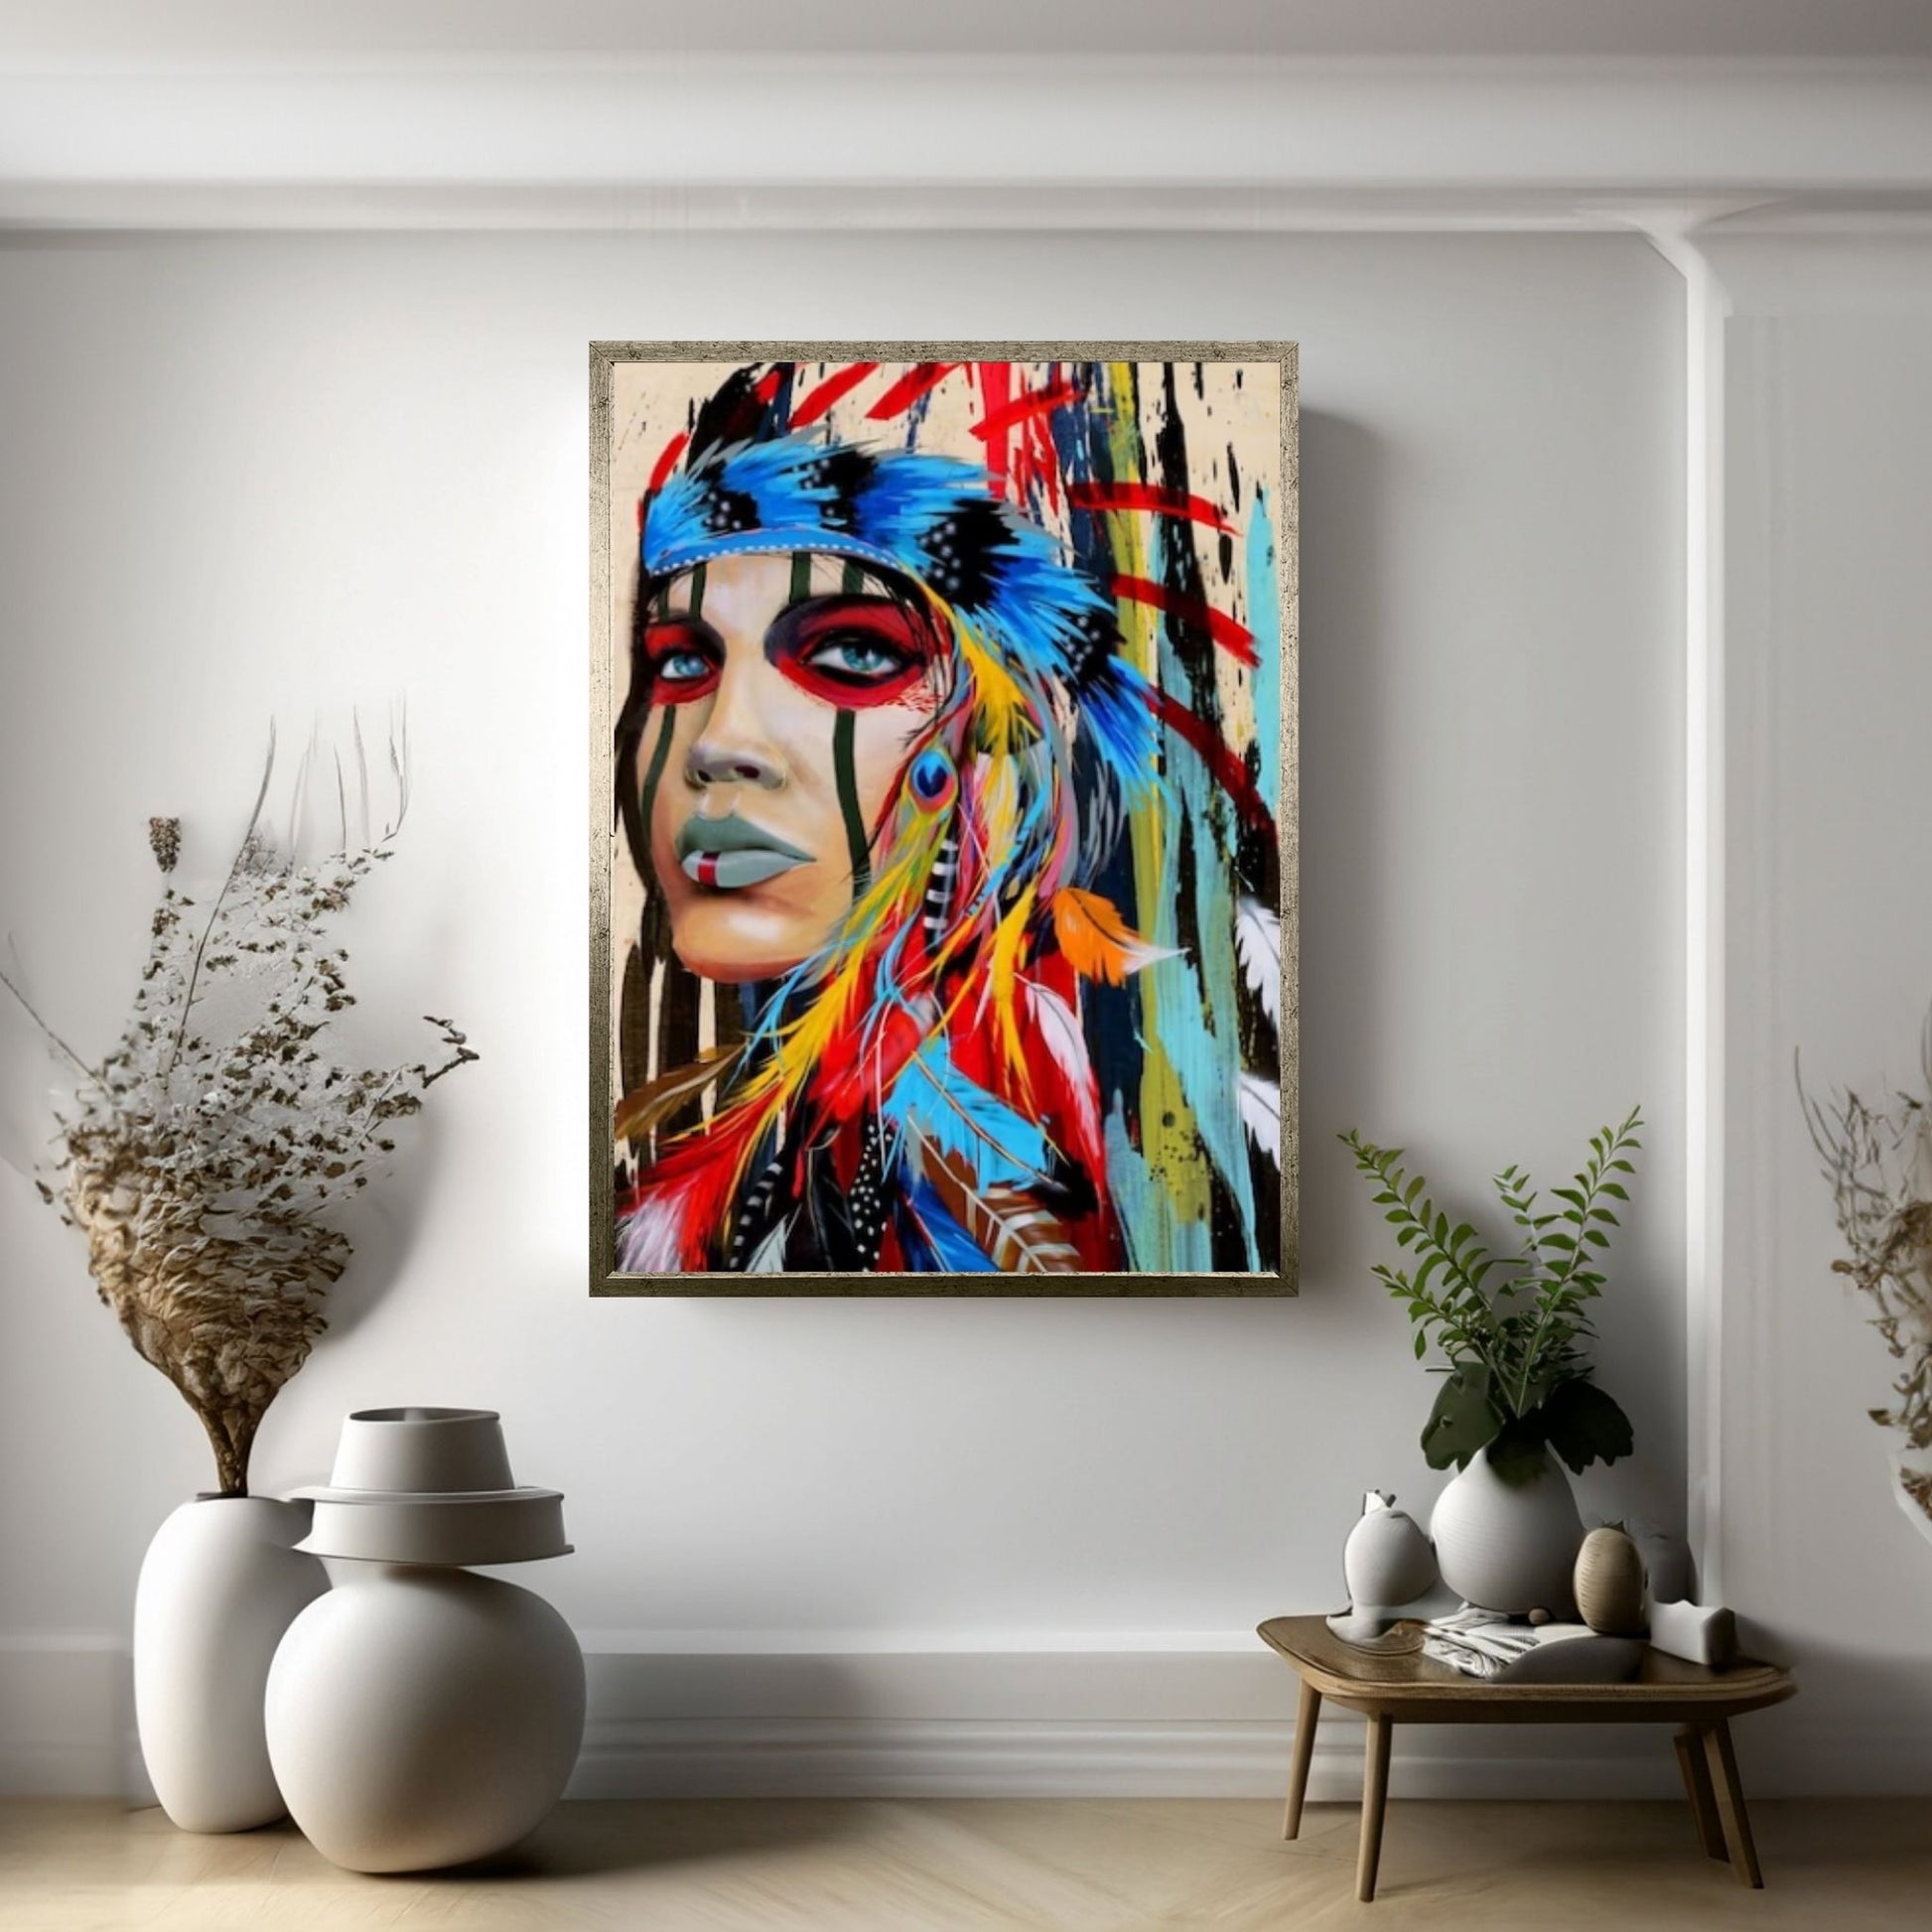 Native American Indian Girl Wall Art Canvas Painting Women, Wall Decor Pop Art - Y Canvas